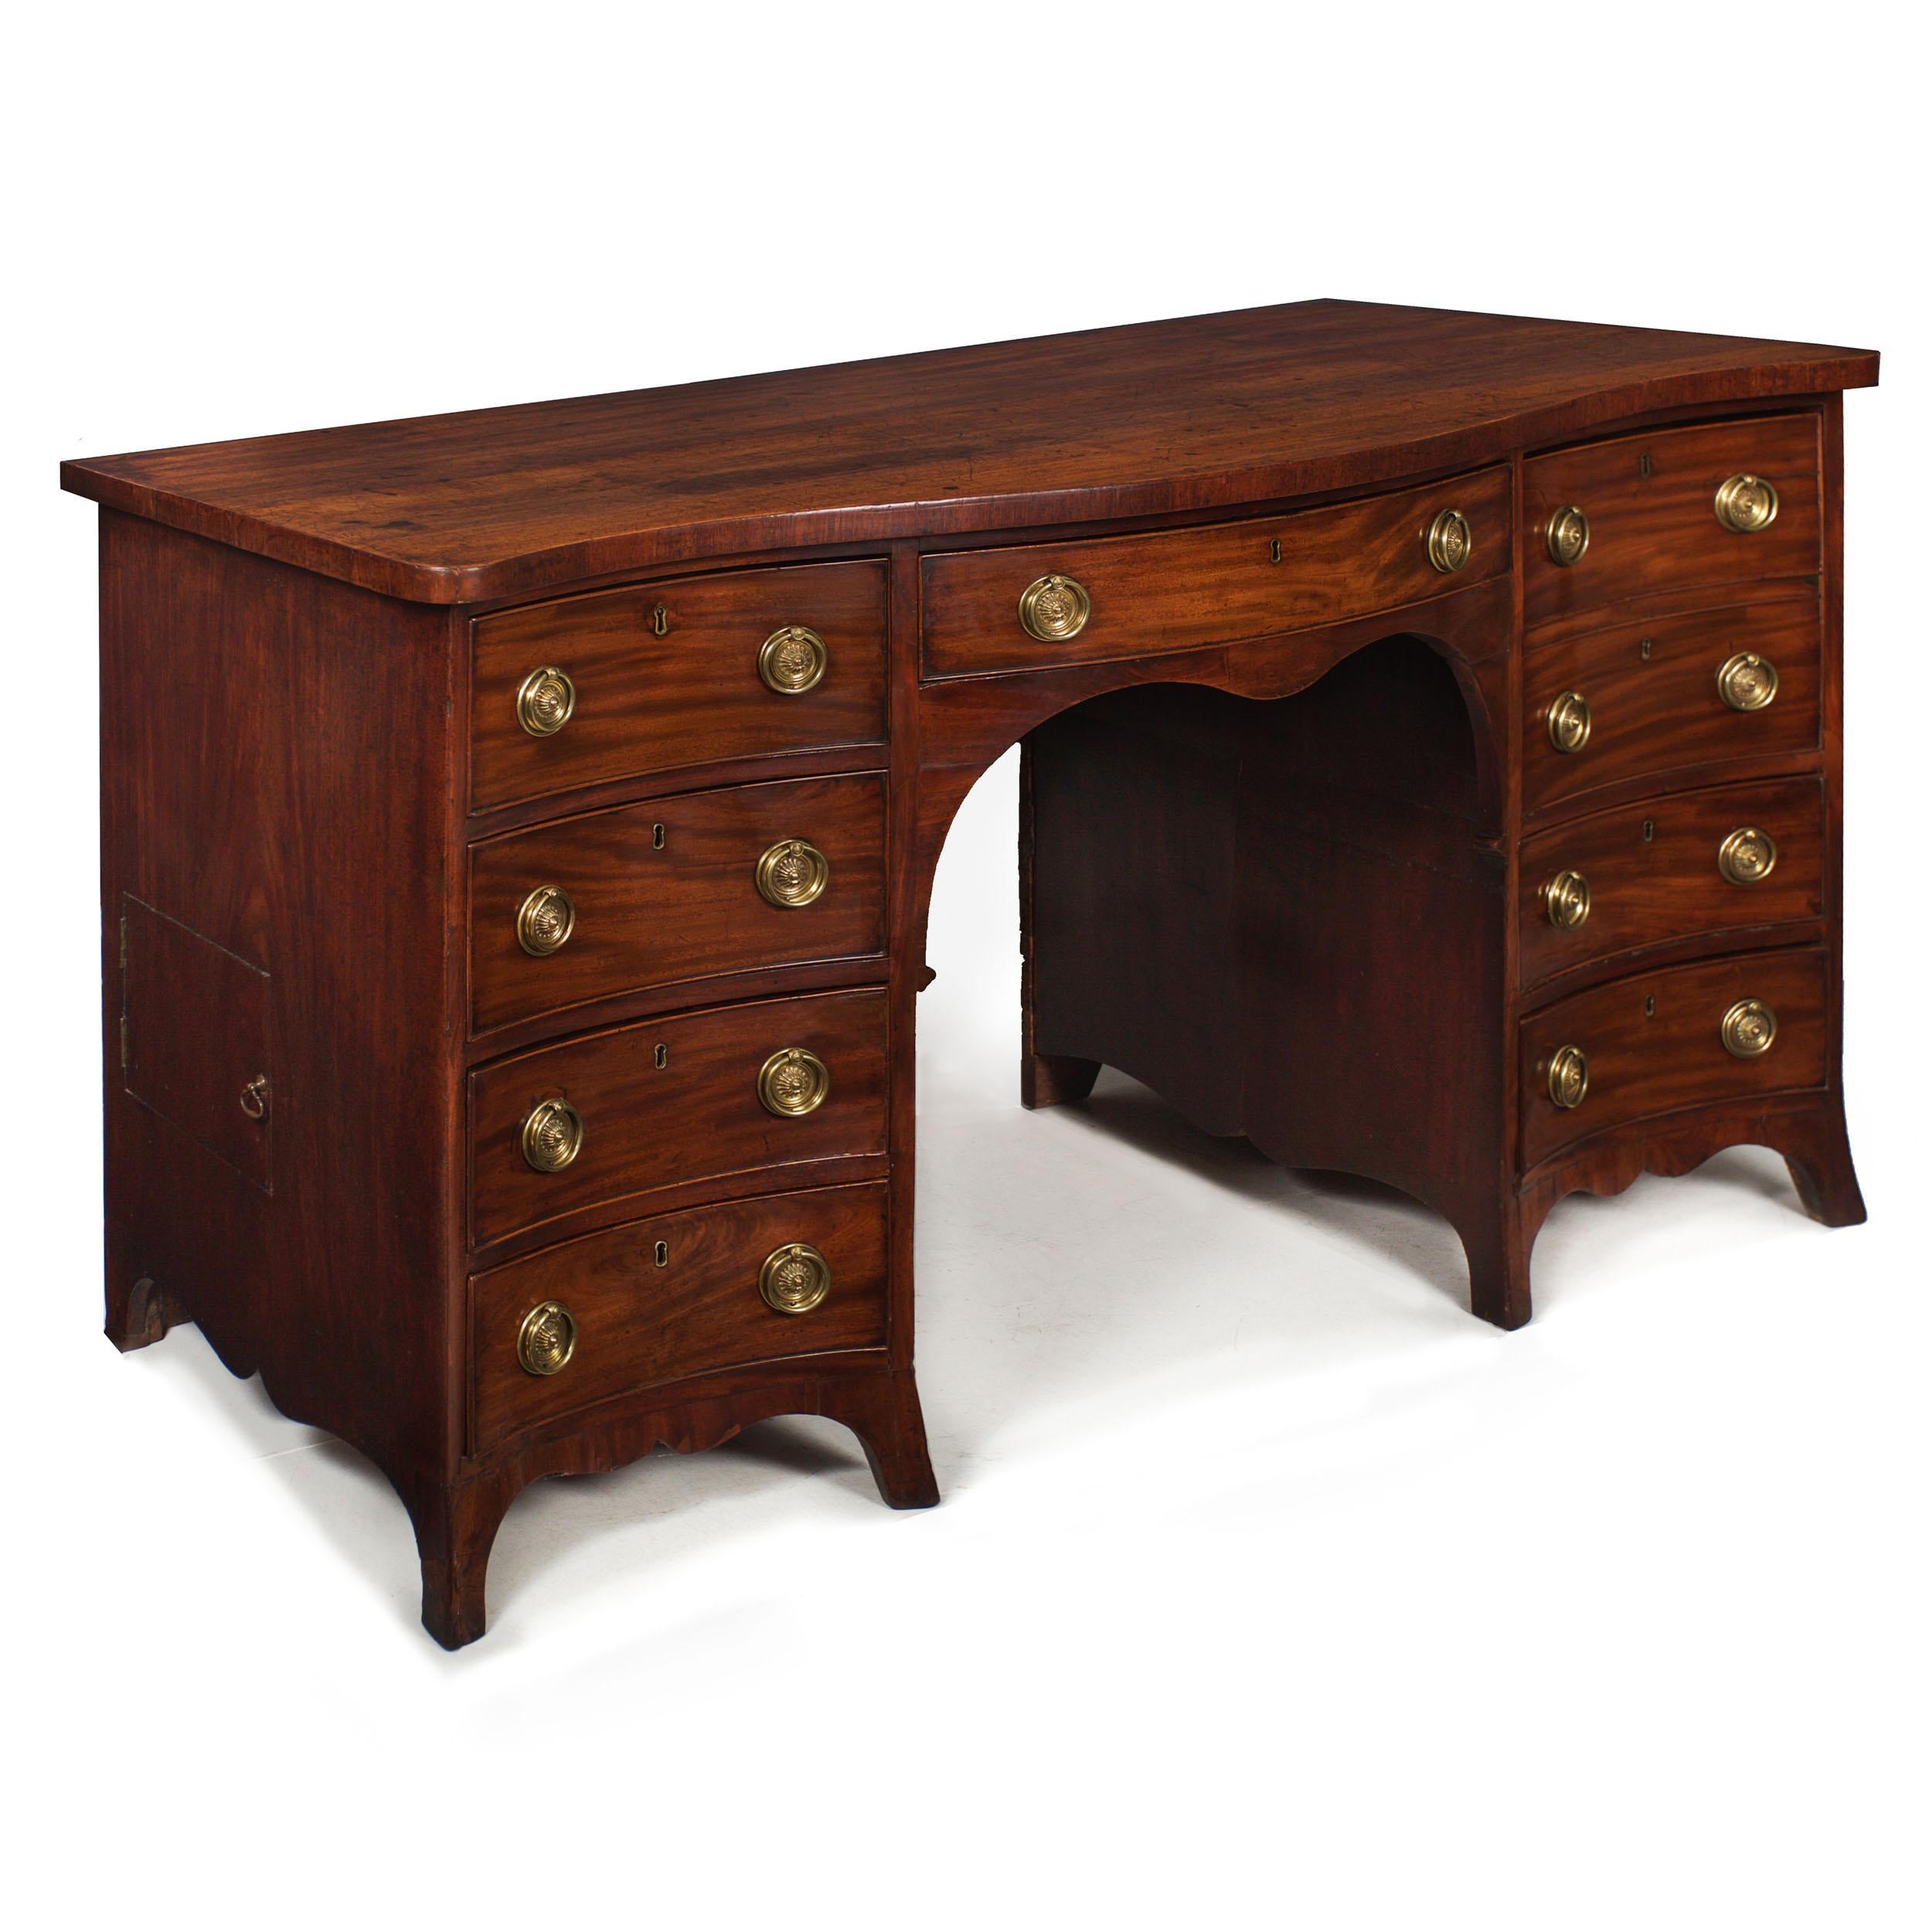 18th Century English George III Antique Mahogany Serpentine Pedestal Sideboard For Sale 15